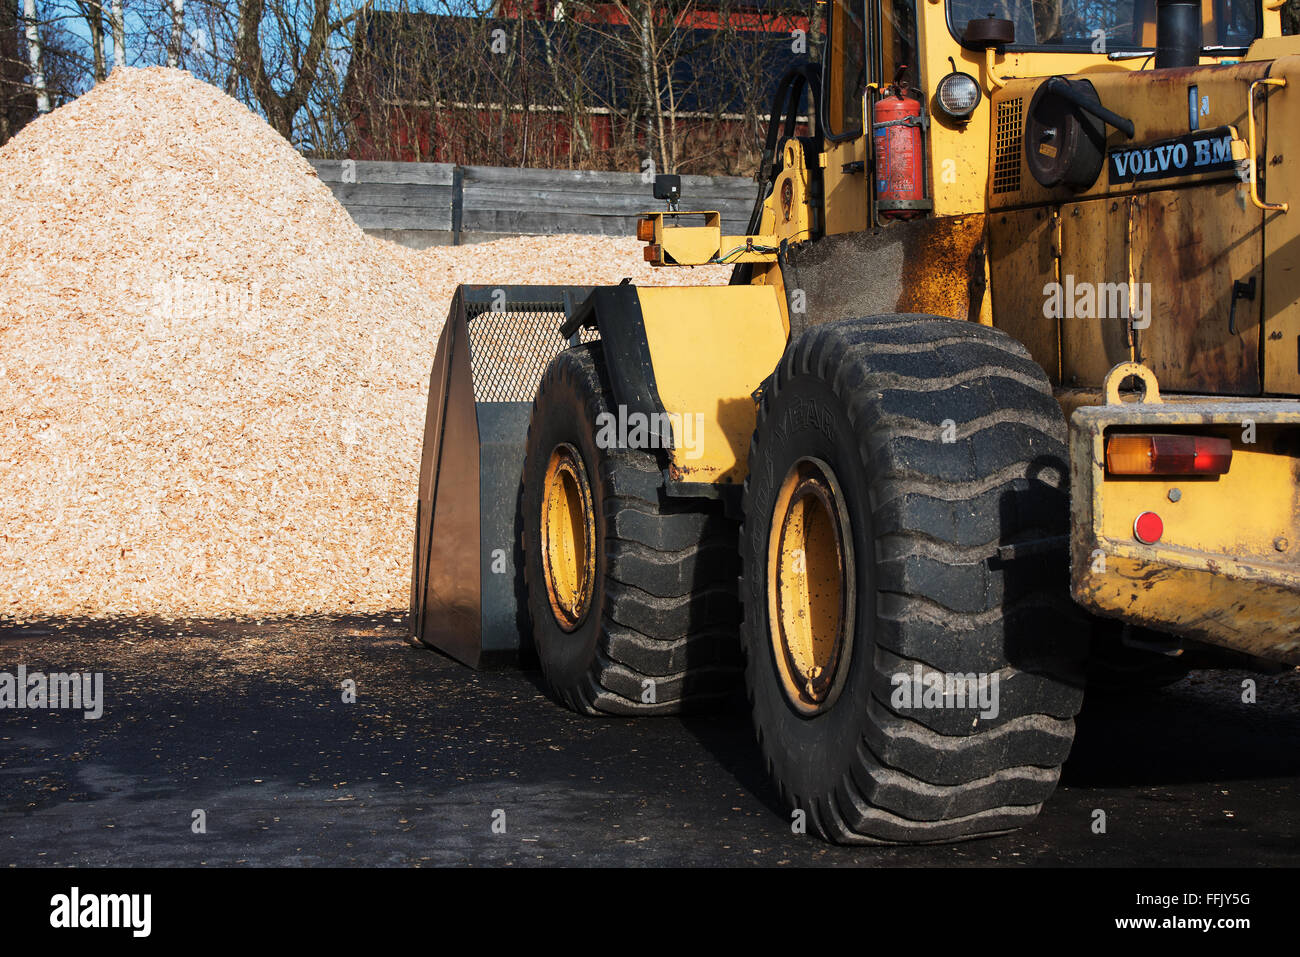 Brakne-Hoby, Sweden - February 07, 2016: A yellow Volvo BM front loader with scoop down loading biofuel from a pile of woodchips Stock Photo